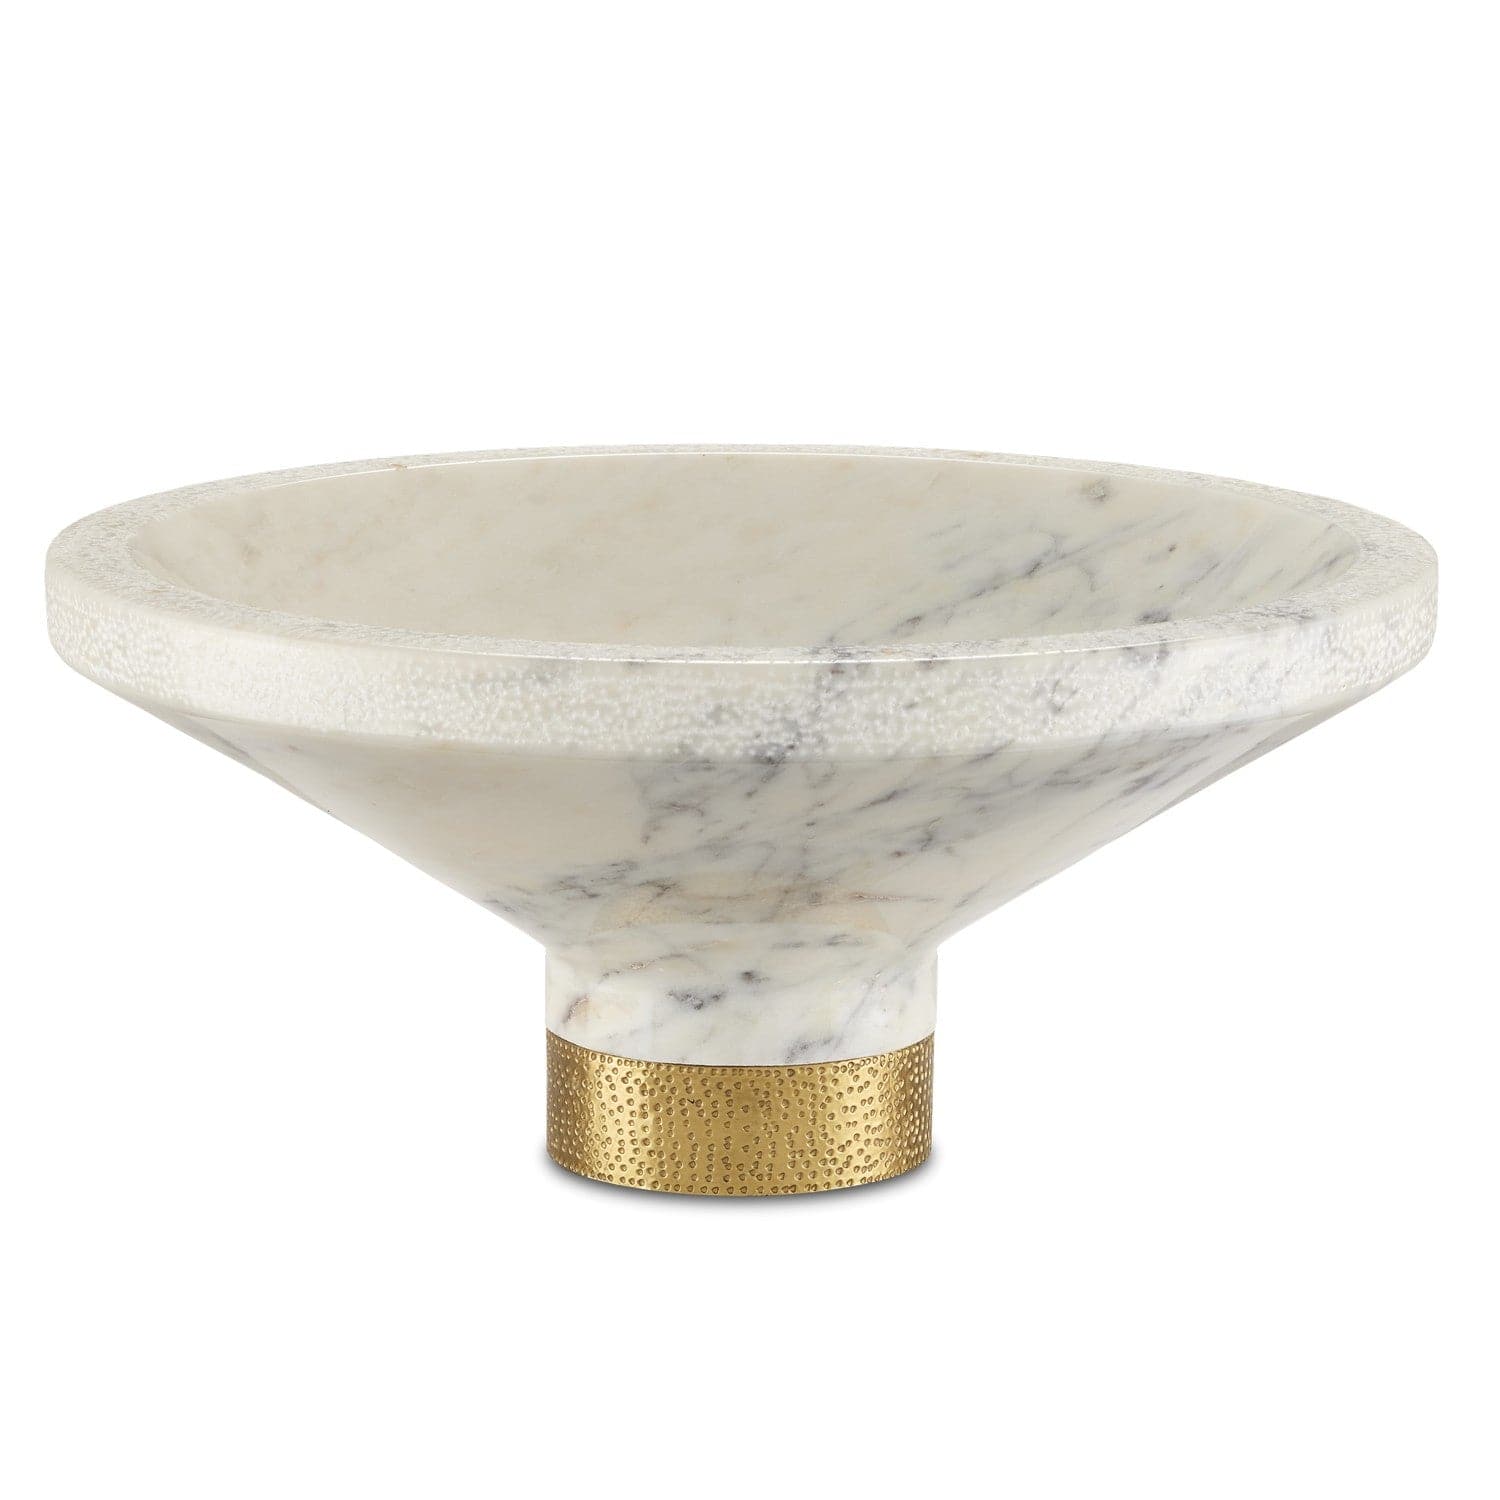 Currey and Company - 1200-0658 - Bowl - White/Brass